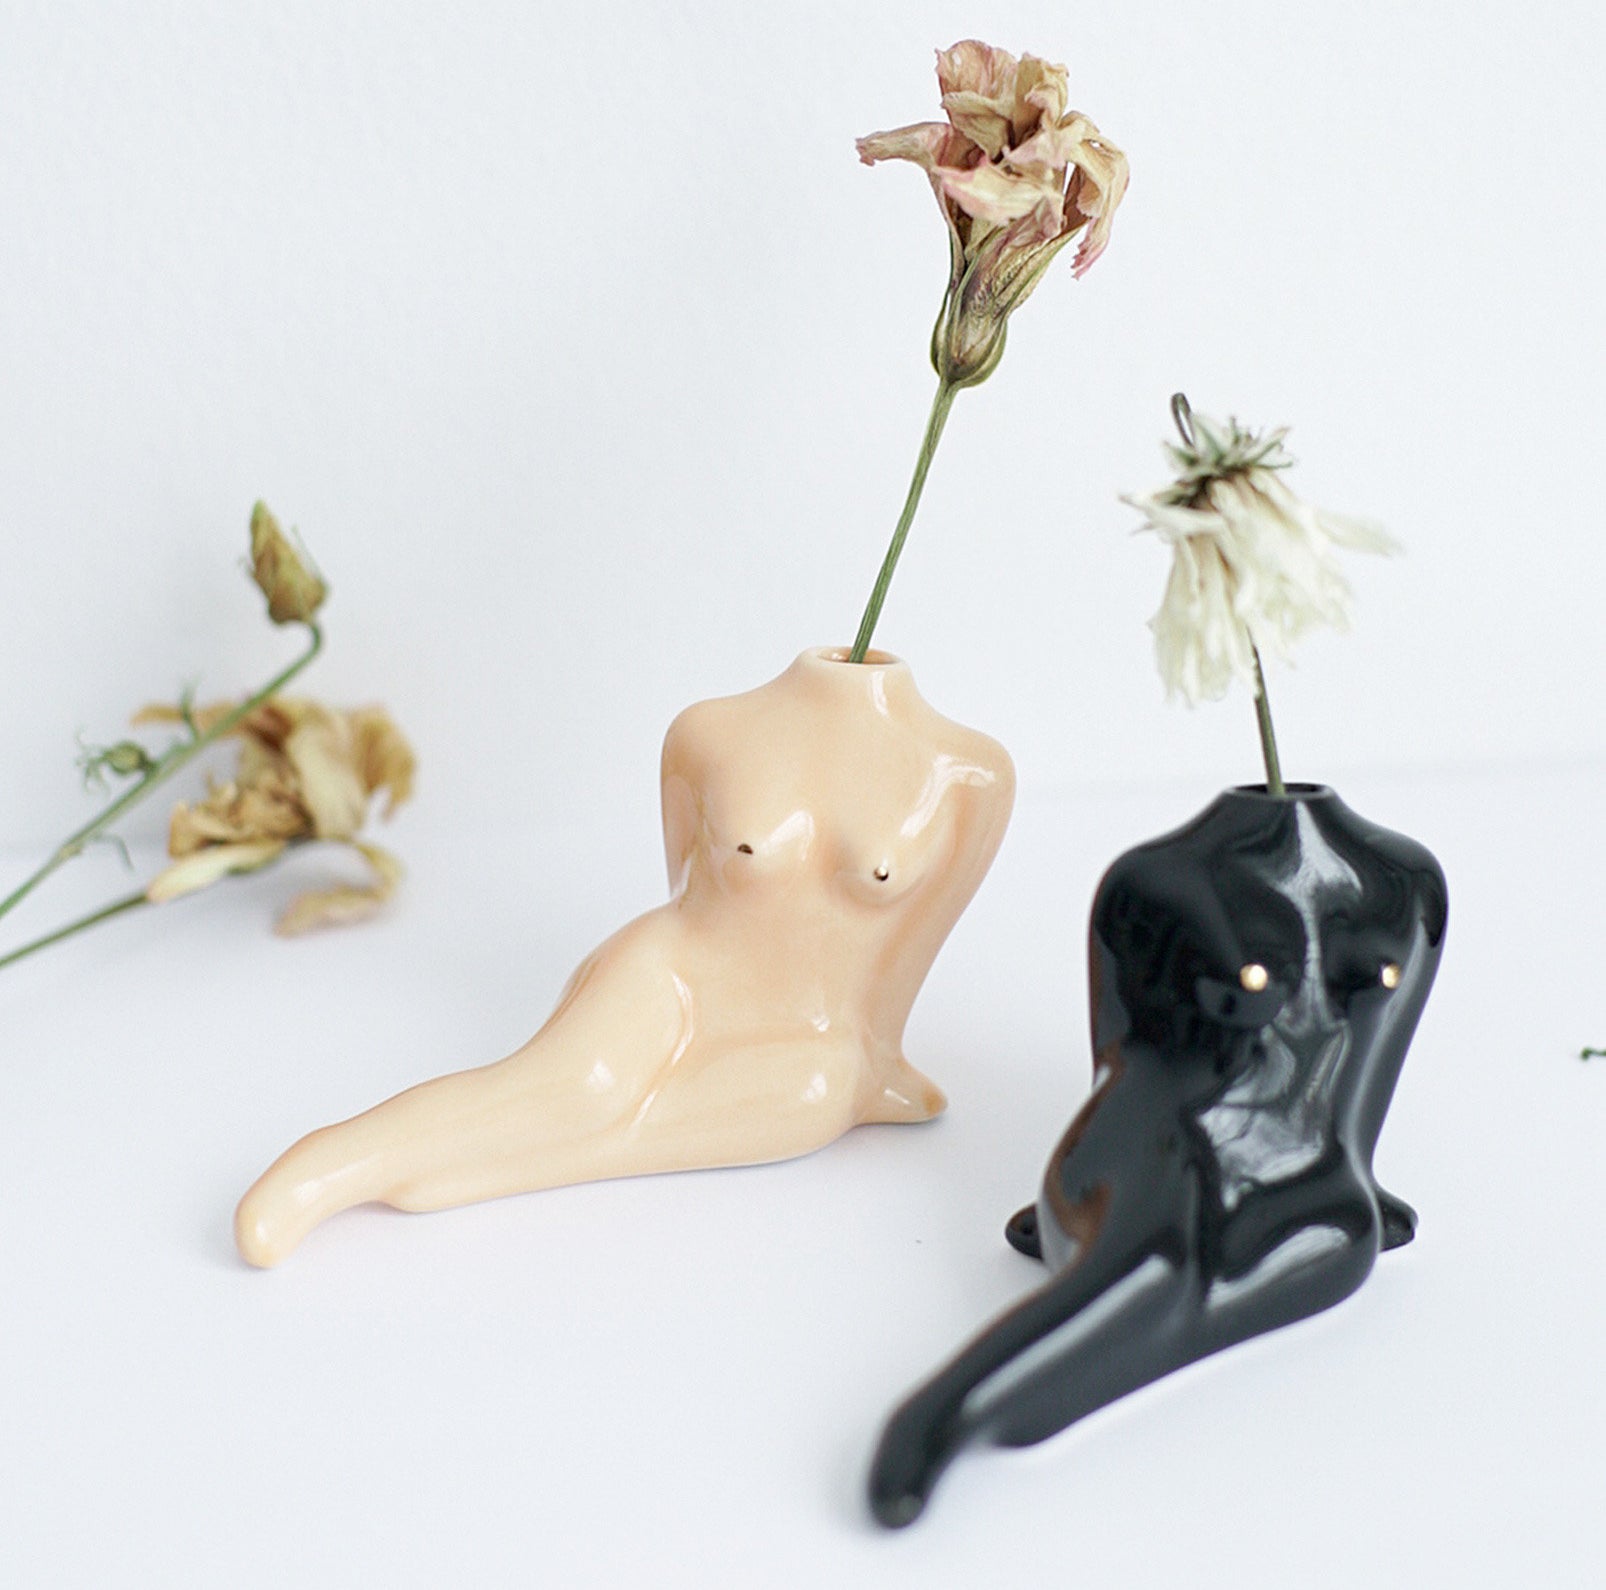 Two body-shaped flower vases with flowers sticking out of them 